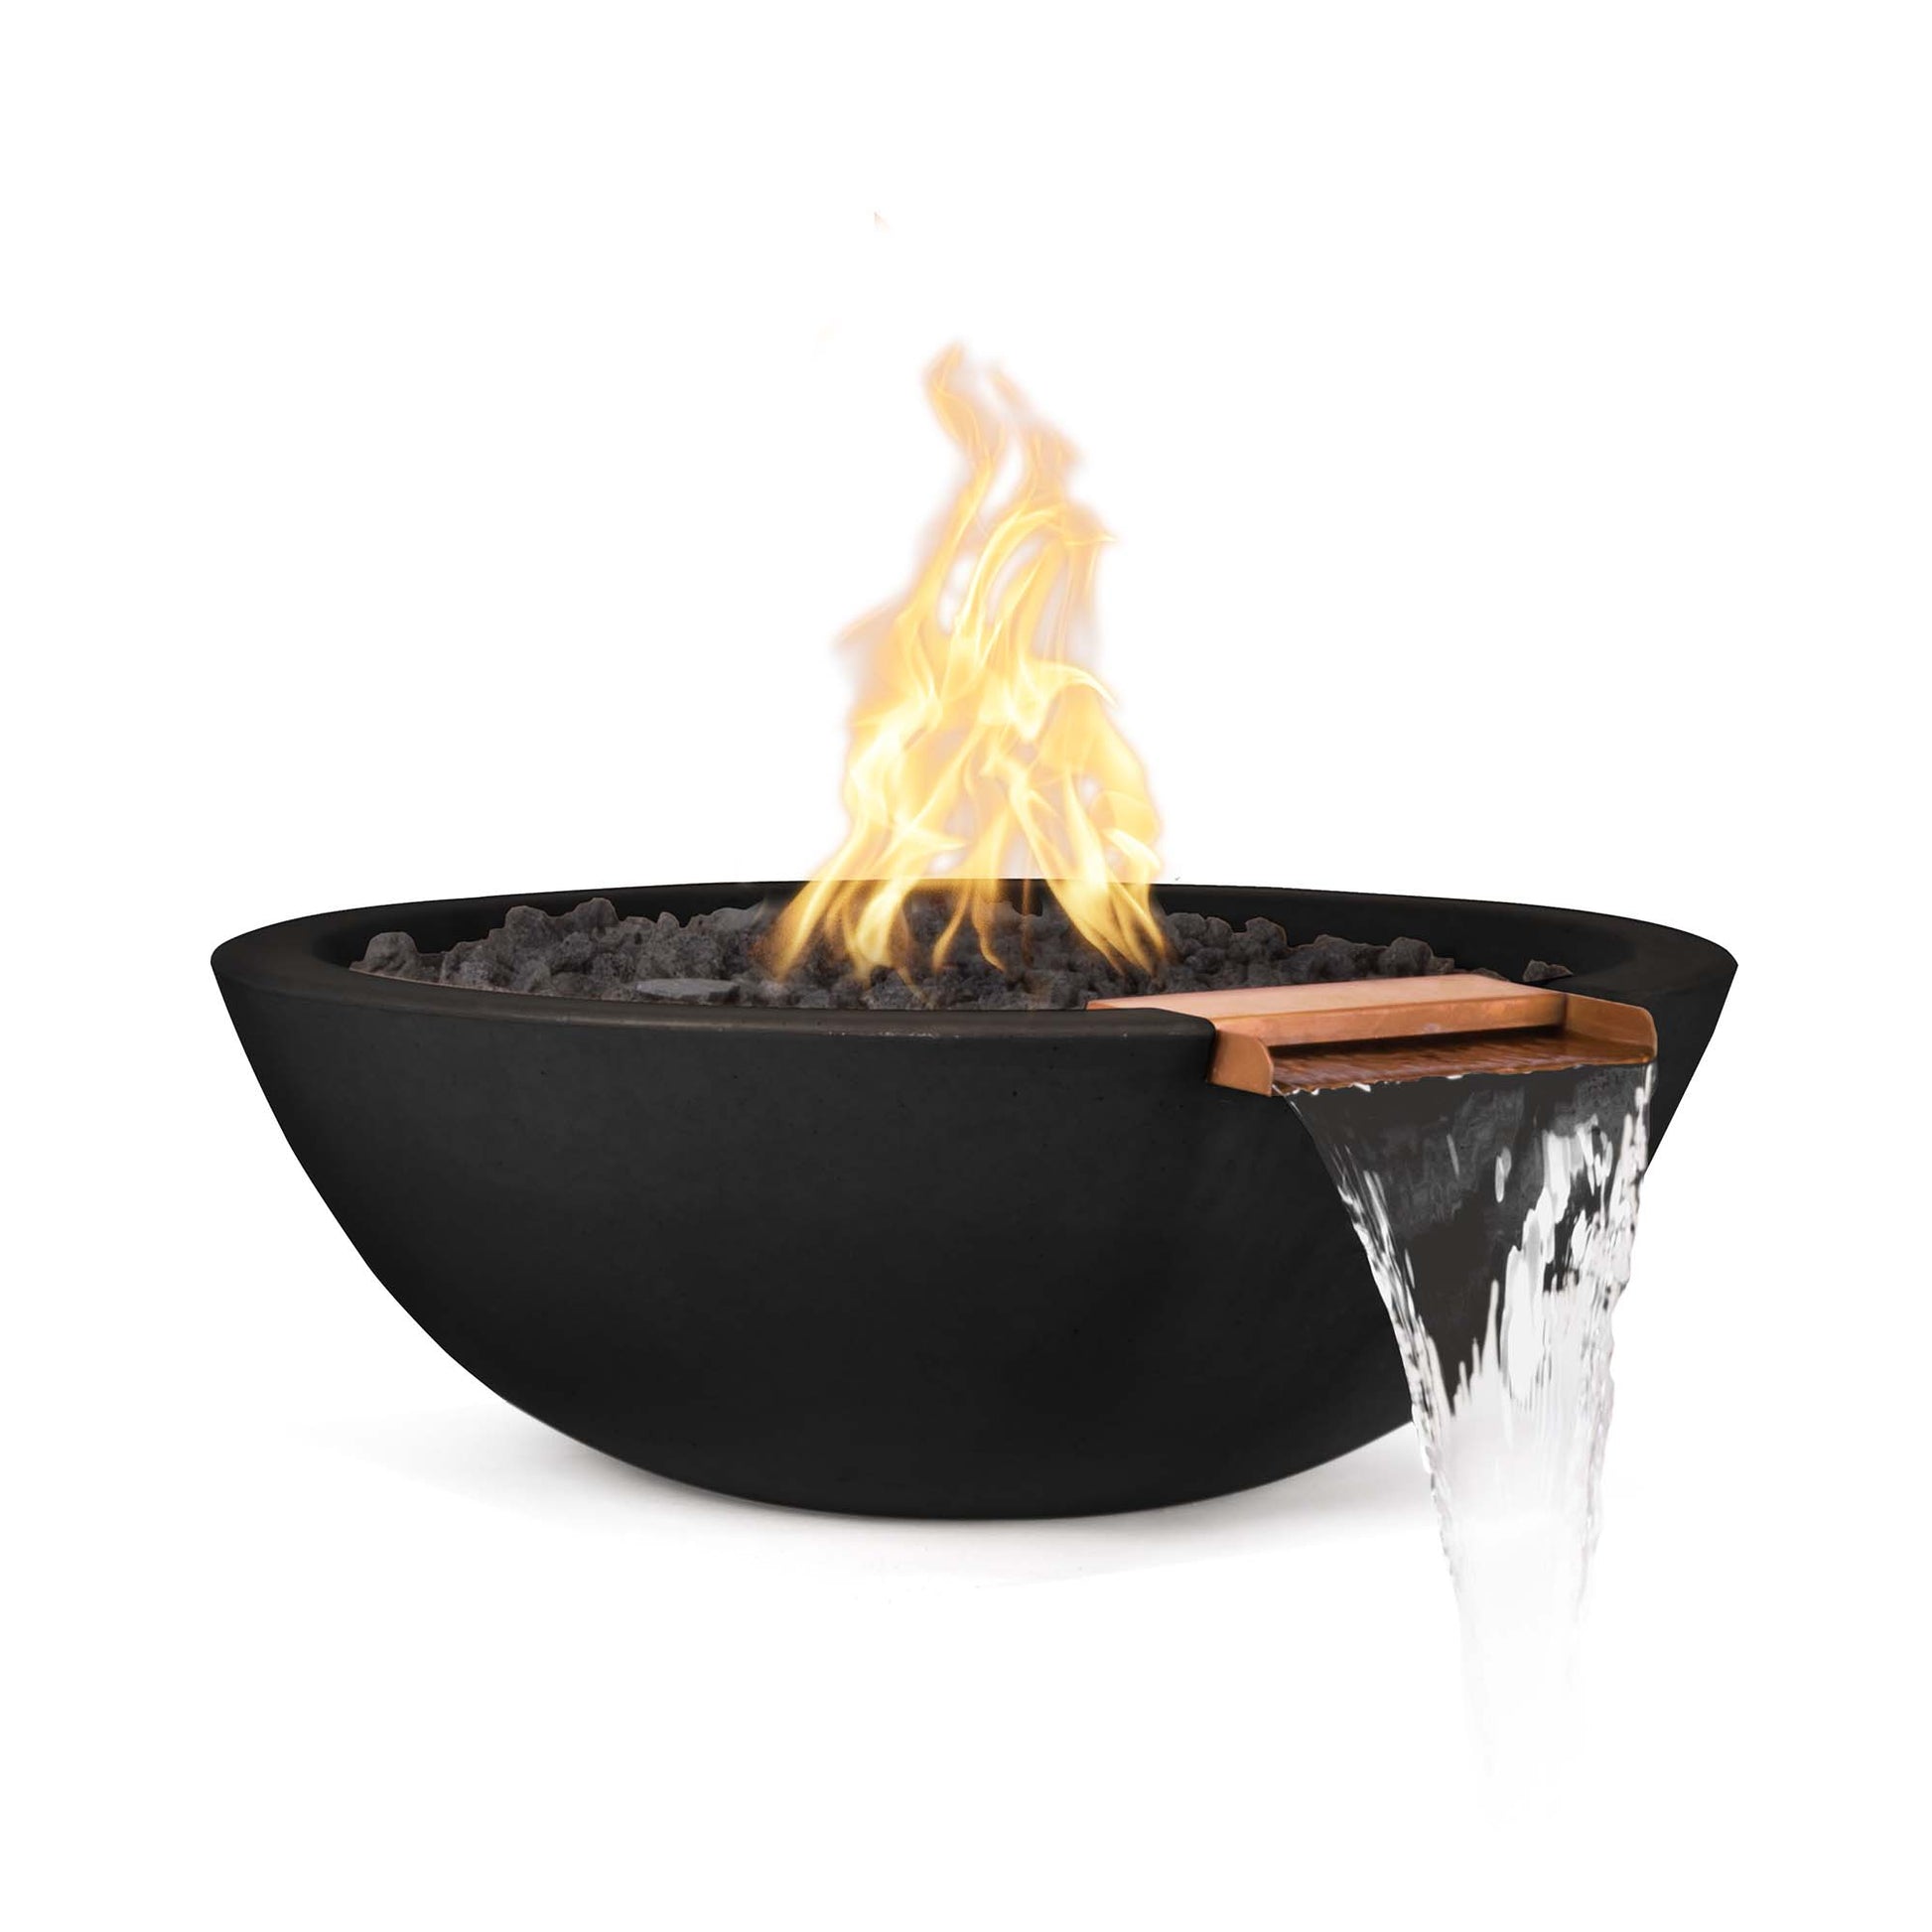 The Outdoor Plus Round Sedona 27" White GFRC Concrete Liquid Propane Fire & Water Bowl with Match Lit with Flame Sense Ignition